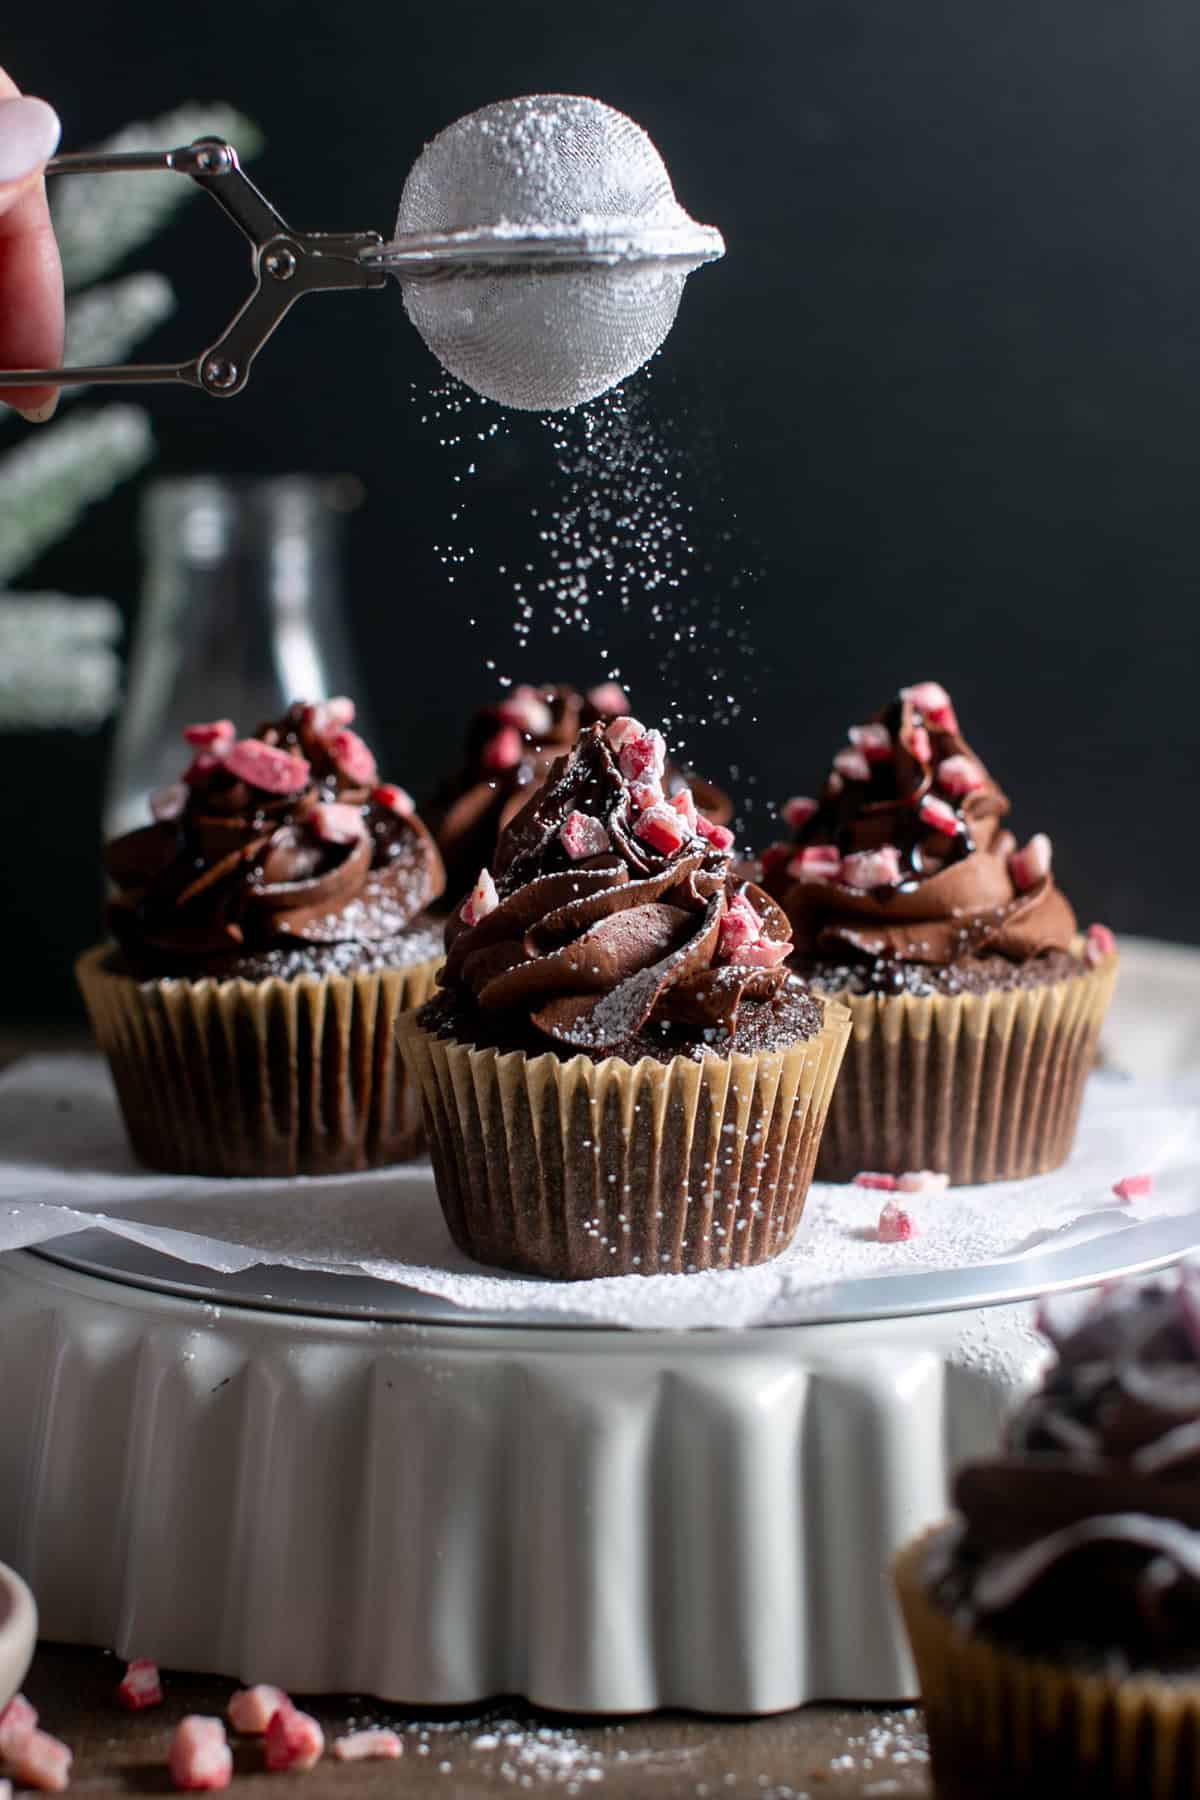 Peppermint Mocha Cupcakes with a sprinkle of powdered sugar.